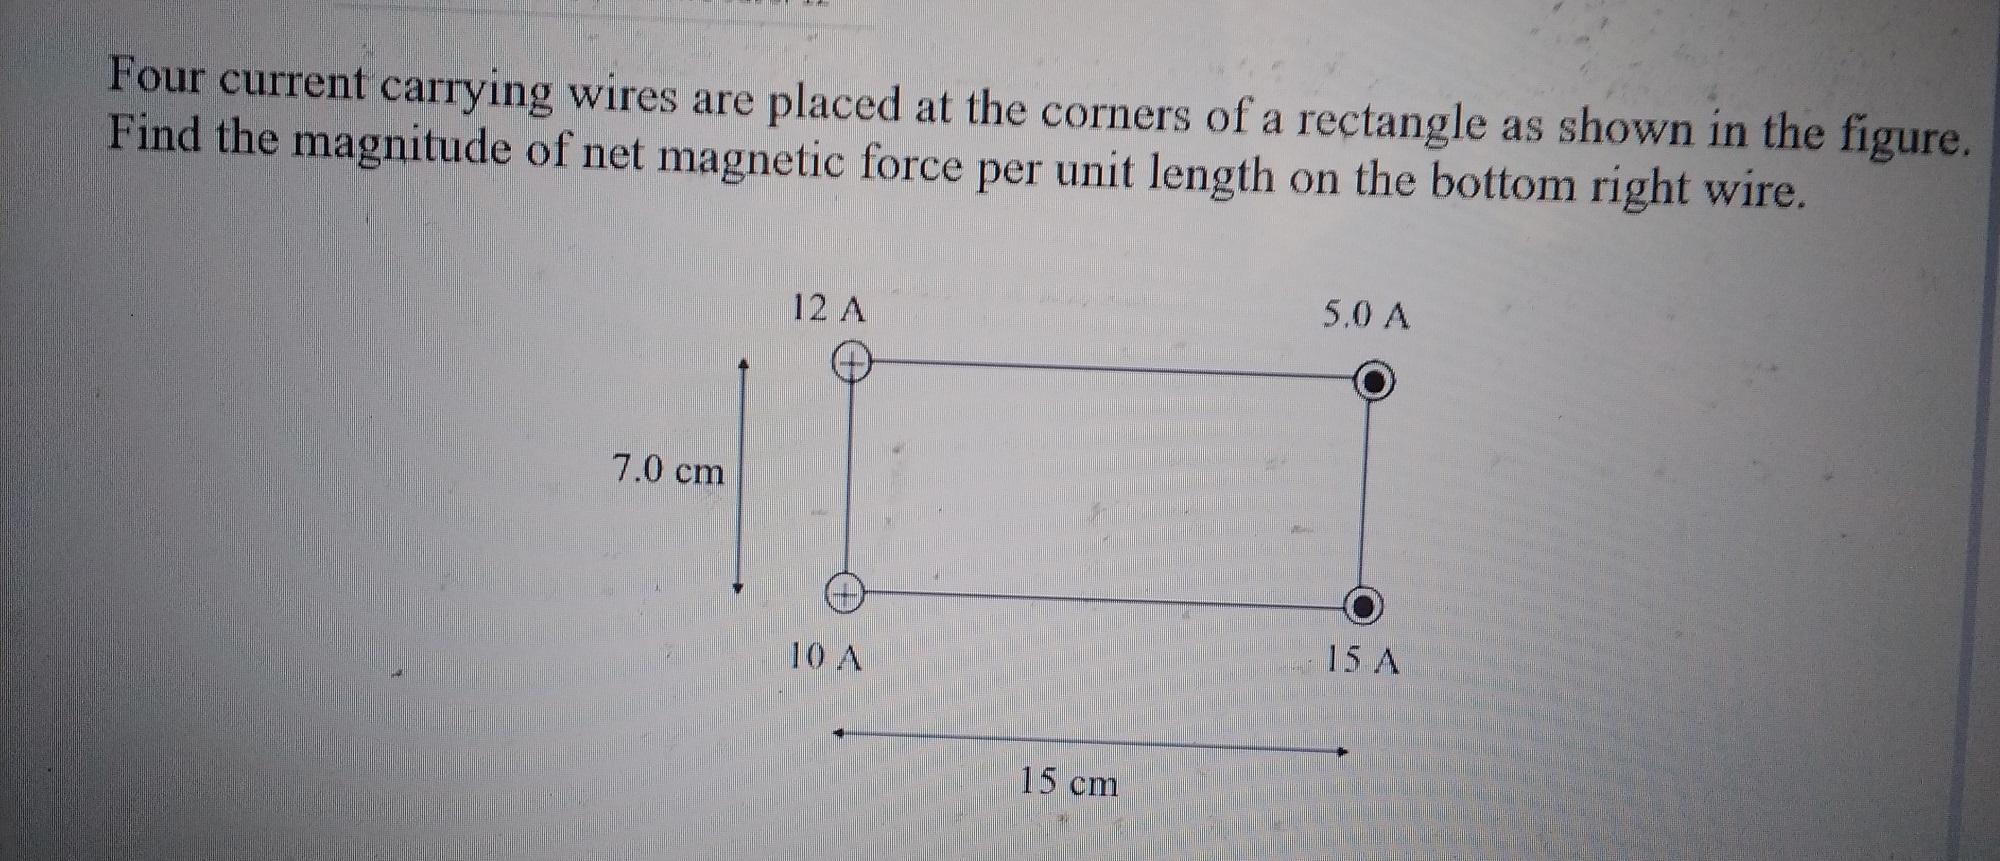 Four current carrying wires are placed at the corners of a rectangle as shown in the figure.Find the magnitude of net magnet